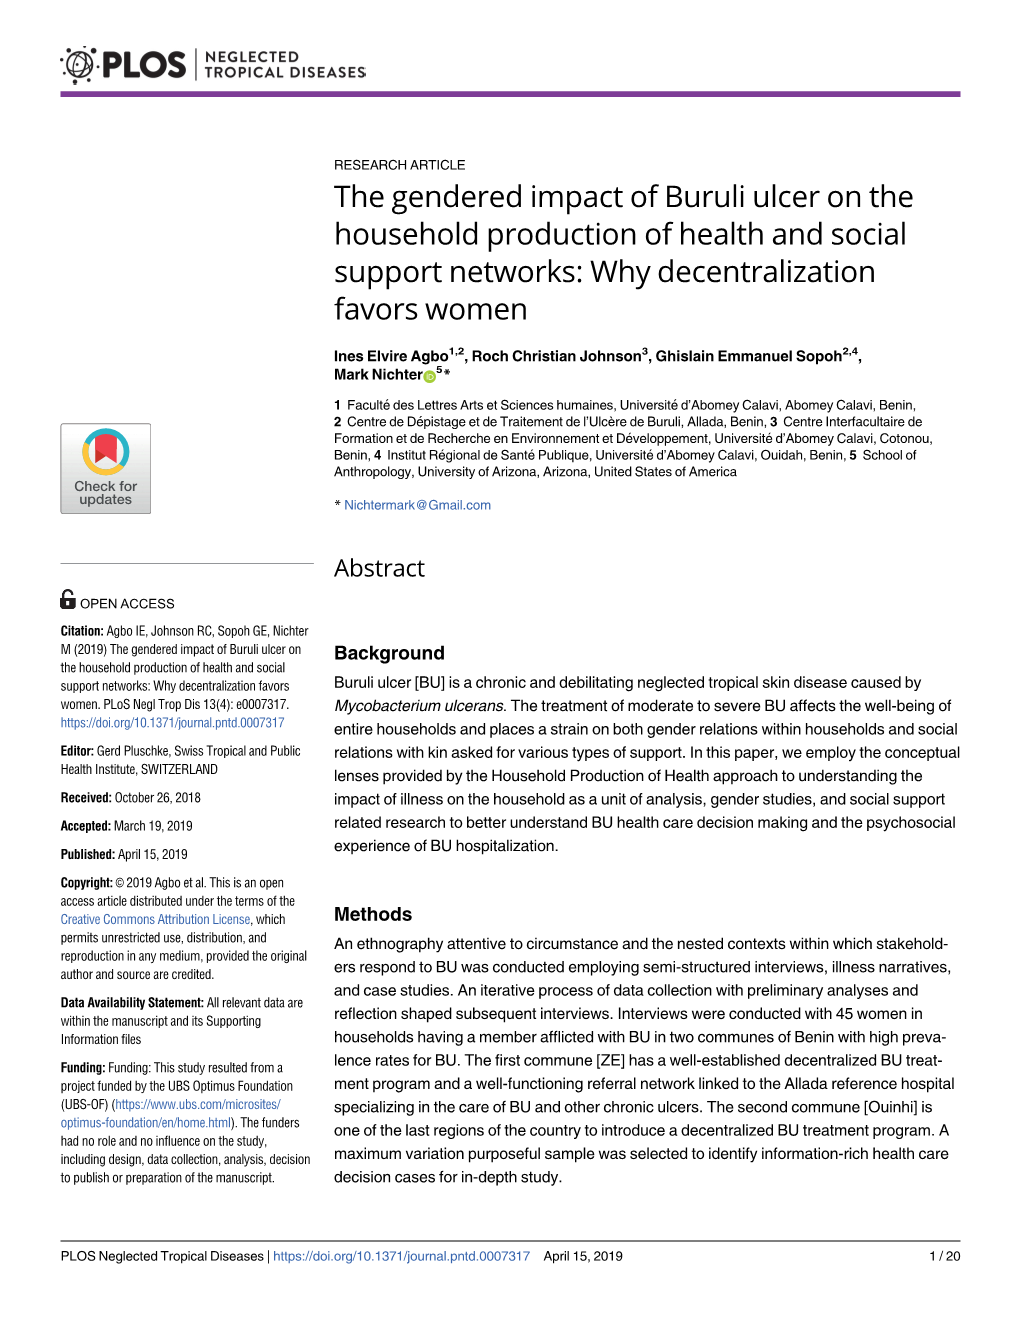 The Gendered Impact of Buruli Ulcer on the Household Production of Health and Social Support Networks: Why Decentralization Favors Women